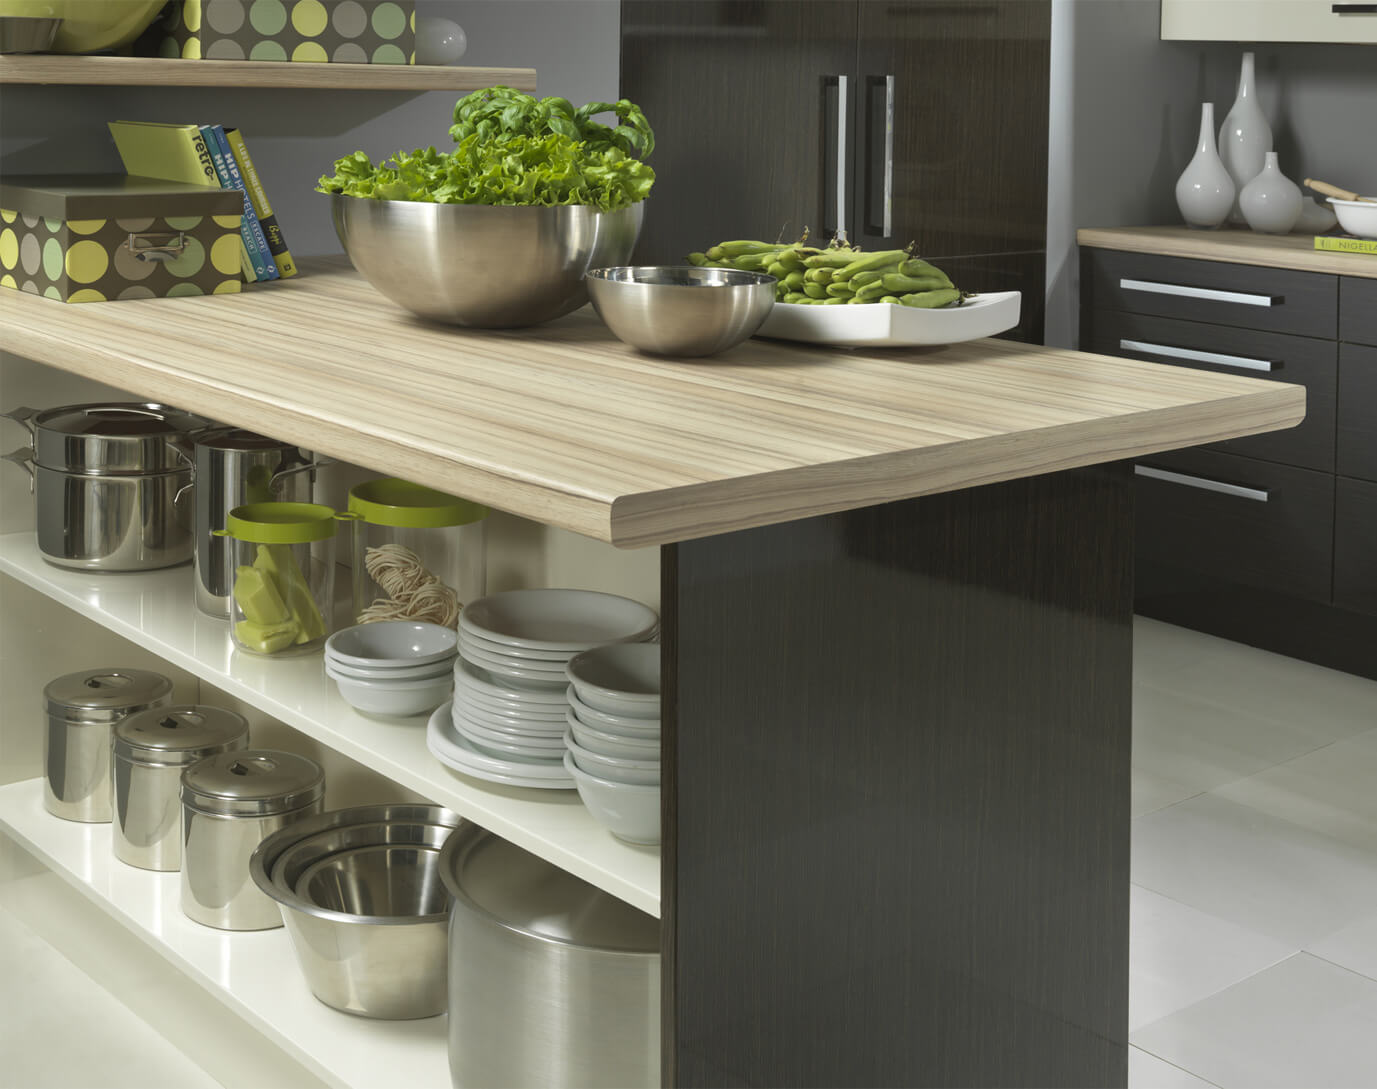 Kitchen Storage Solutions: The best ideas and hacks from our kitchen experts 